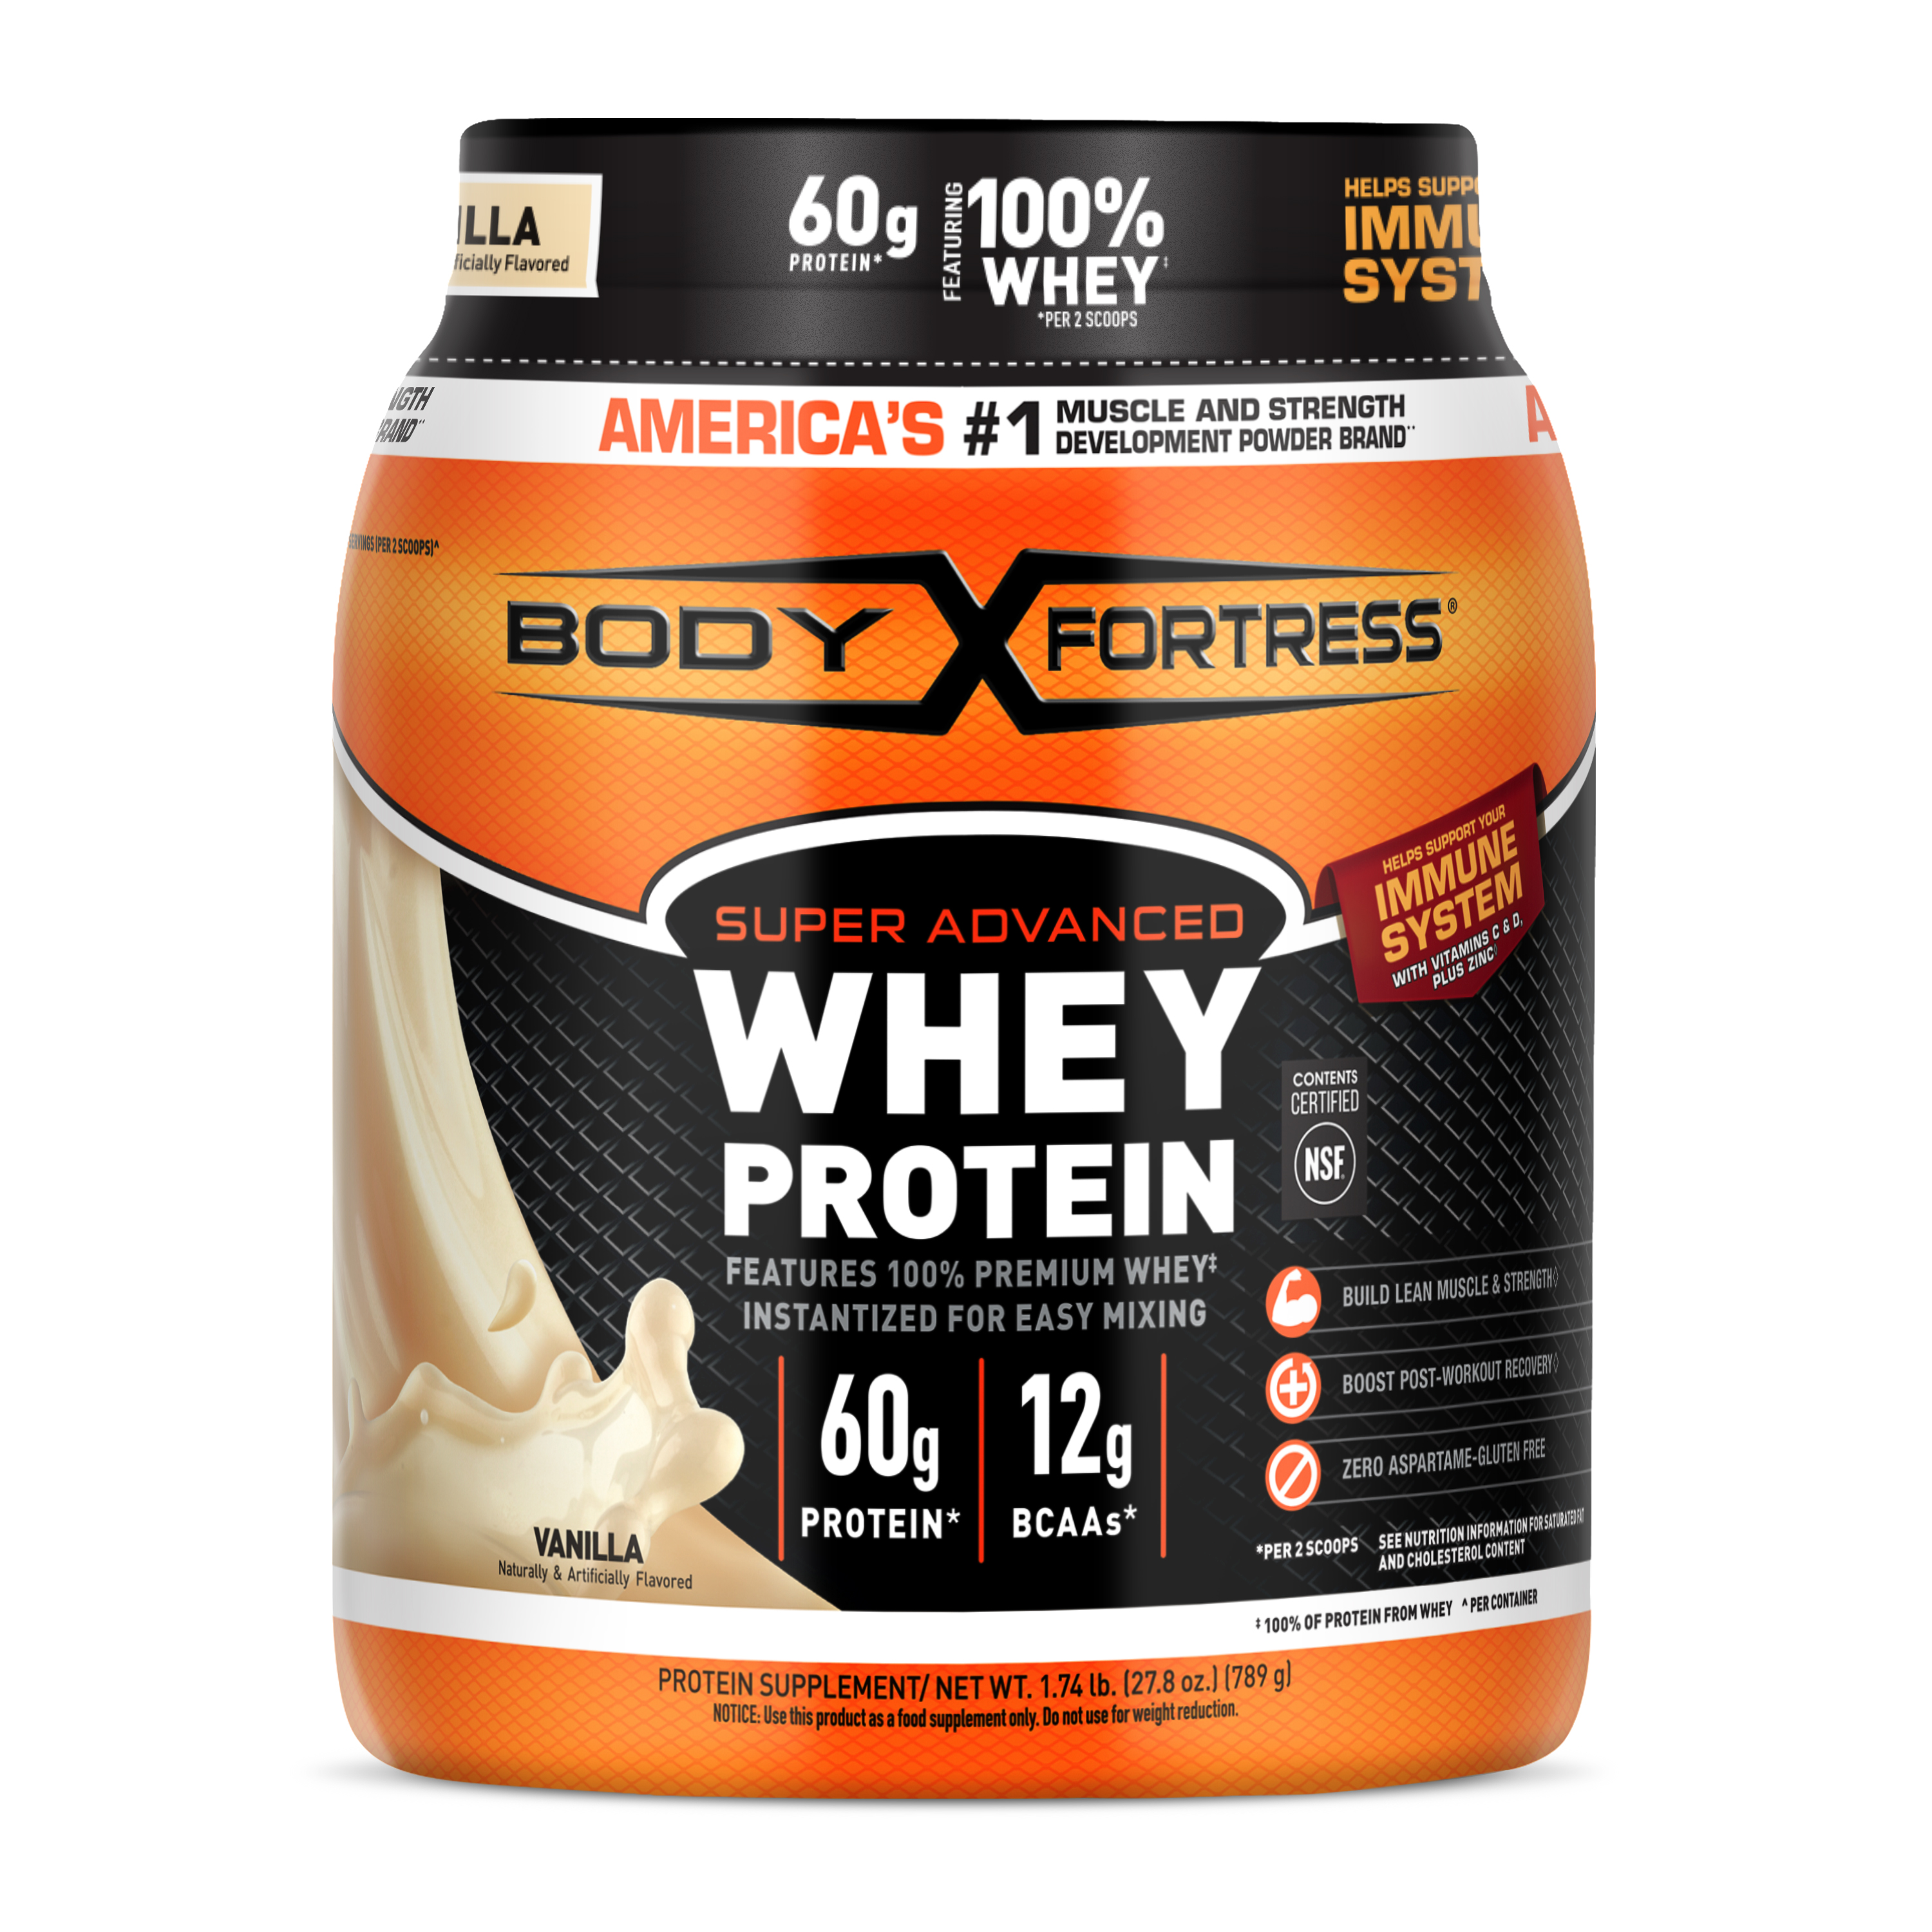 Body Fortress 100% Whey, Premium Protein Powder, Vanilla, 1.74lbs (Packaging May Vary) - image 1 of 7